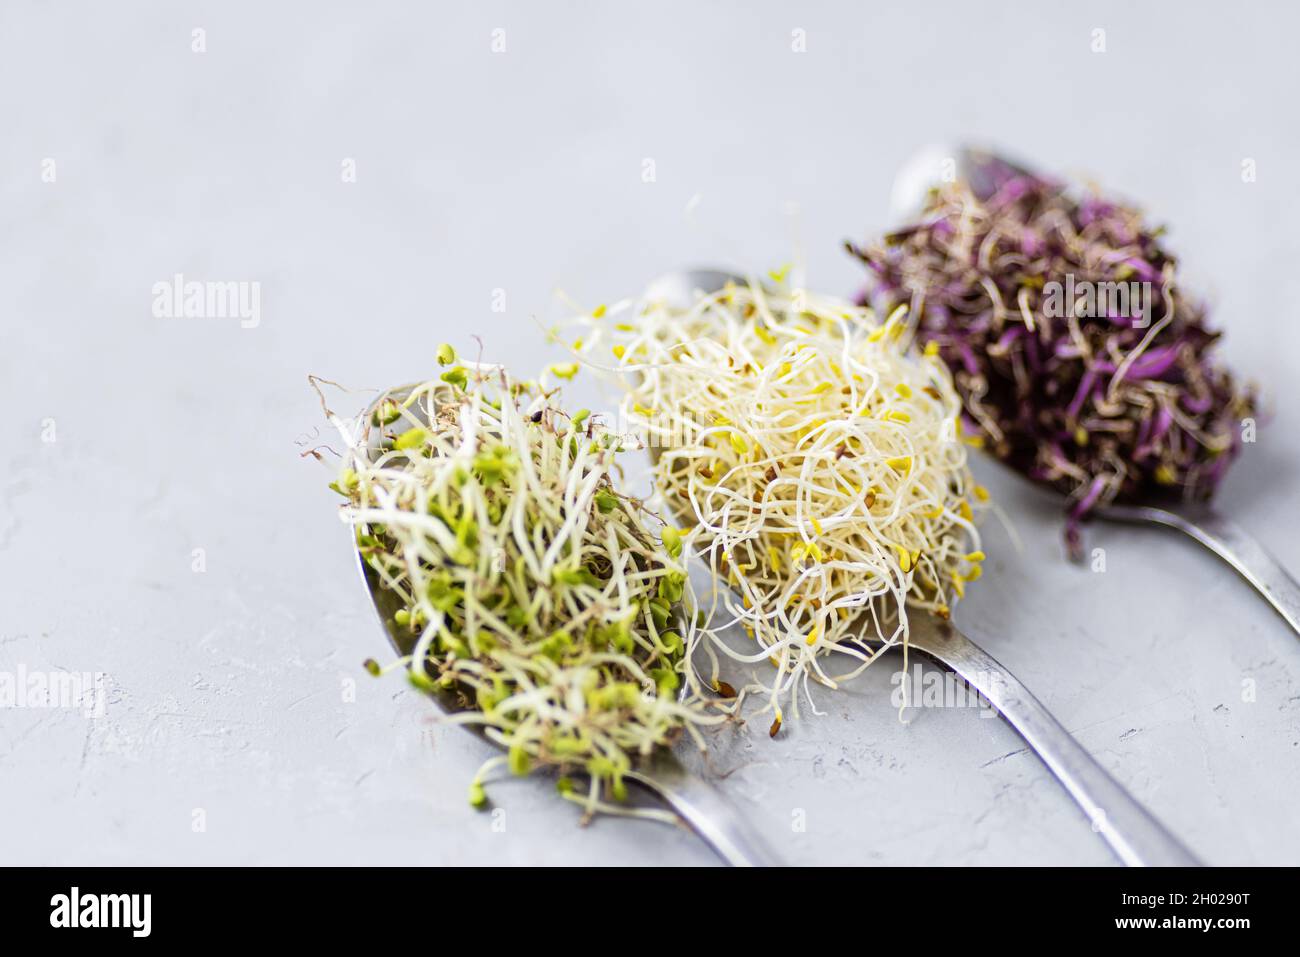 Flat lay top view of microgreens assortment on gray concrete background. Fresh alfalfa sprouts, broccoli flower buds, coral buds, mixed garnish Stock Photo